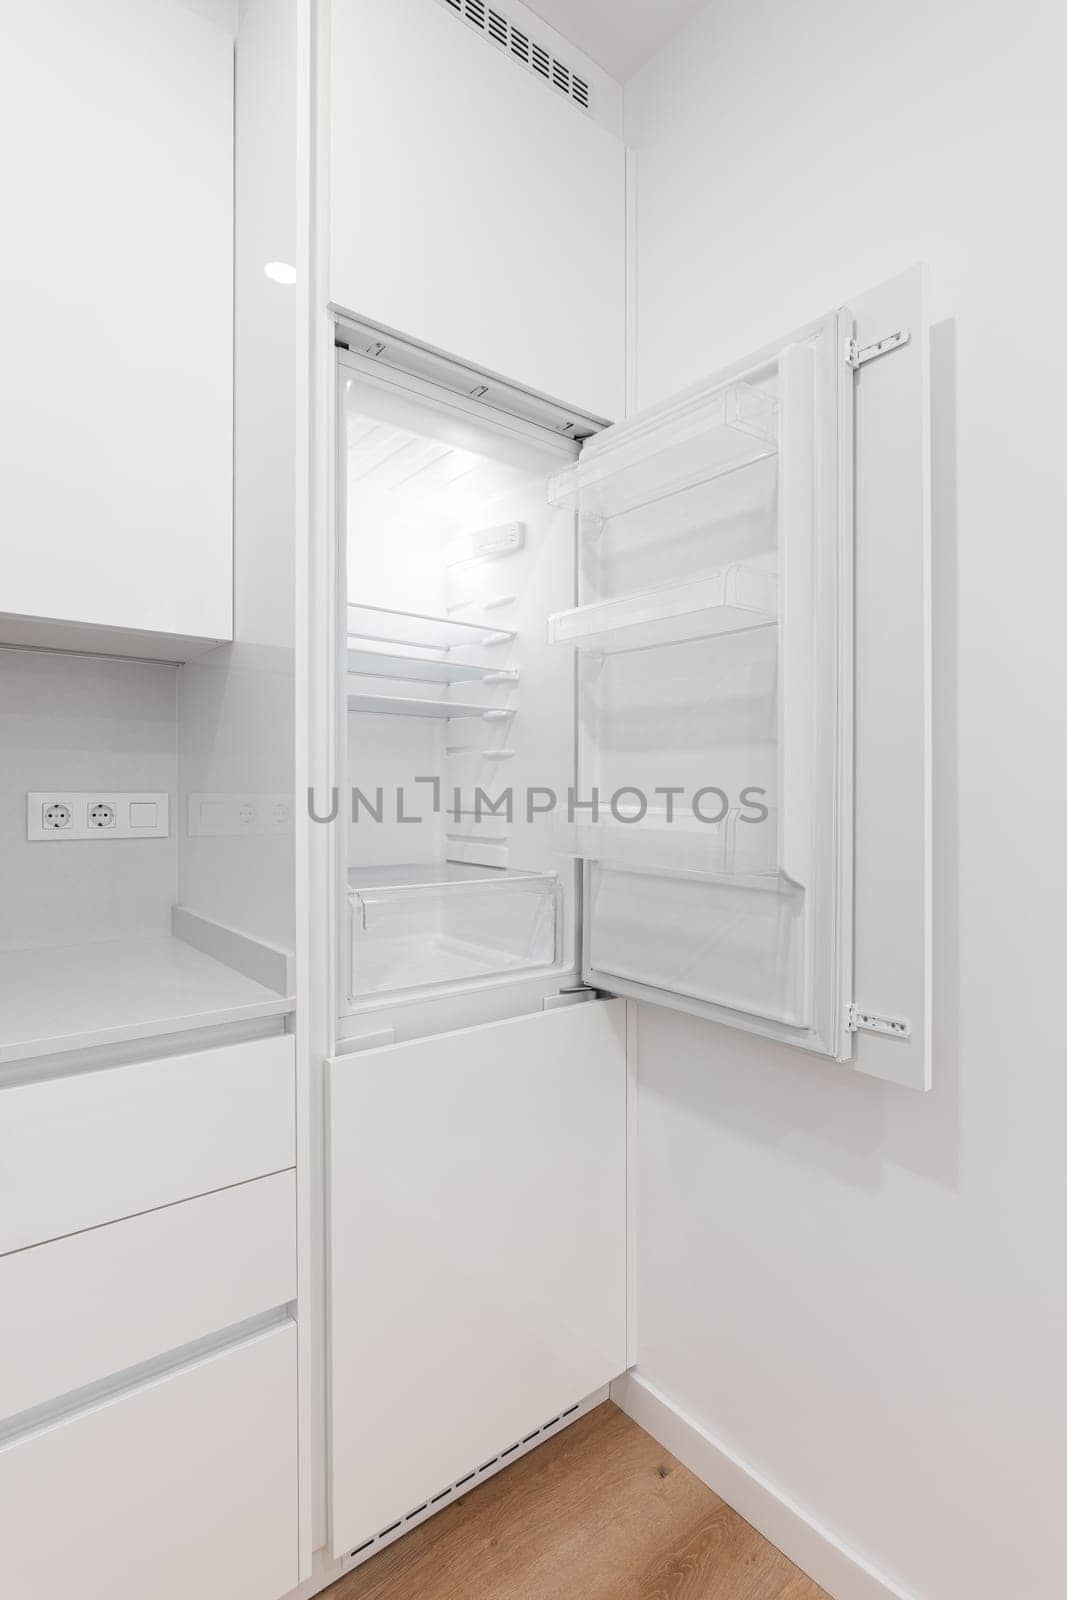 Photo of a modern white refrigerator freezer in a contemporary kitchen by apavlin